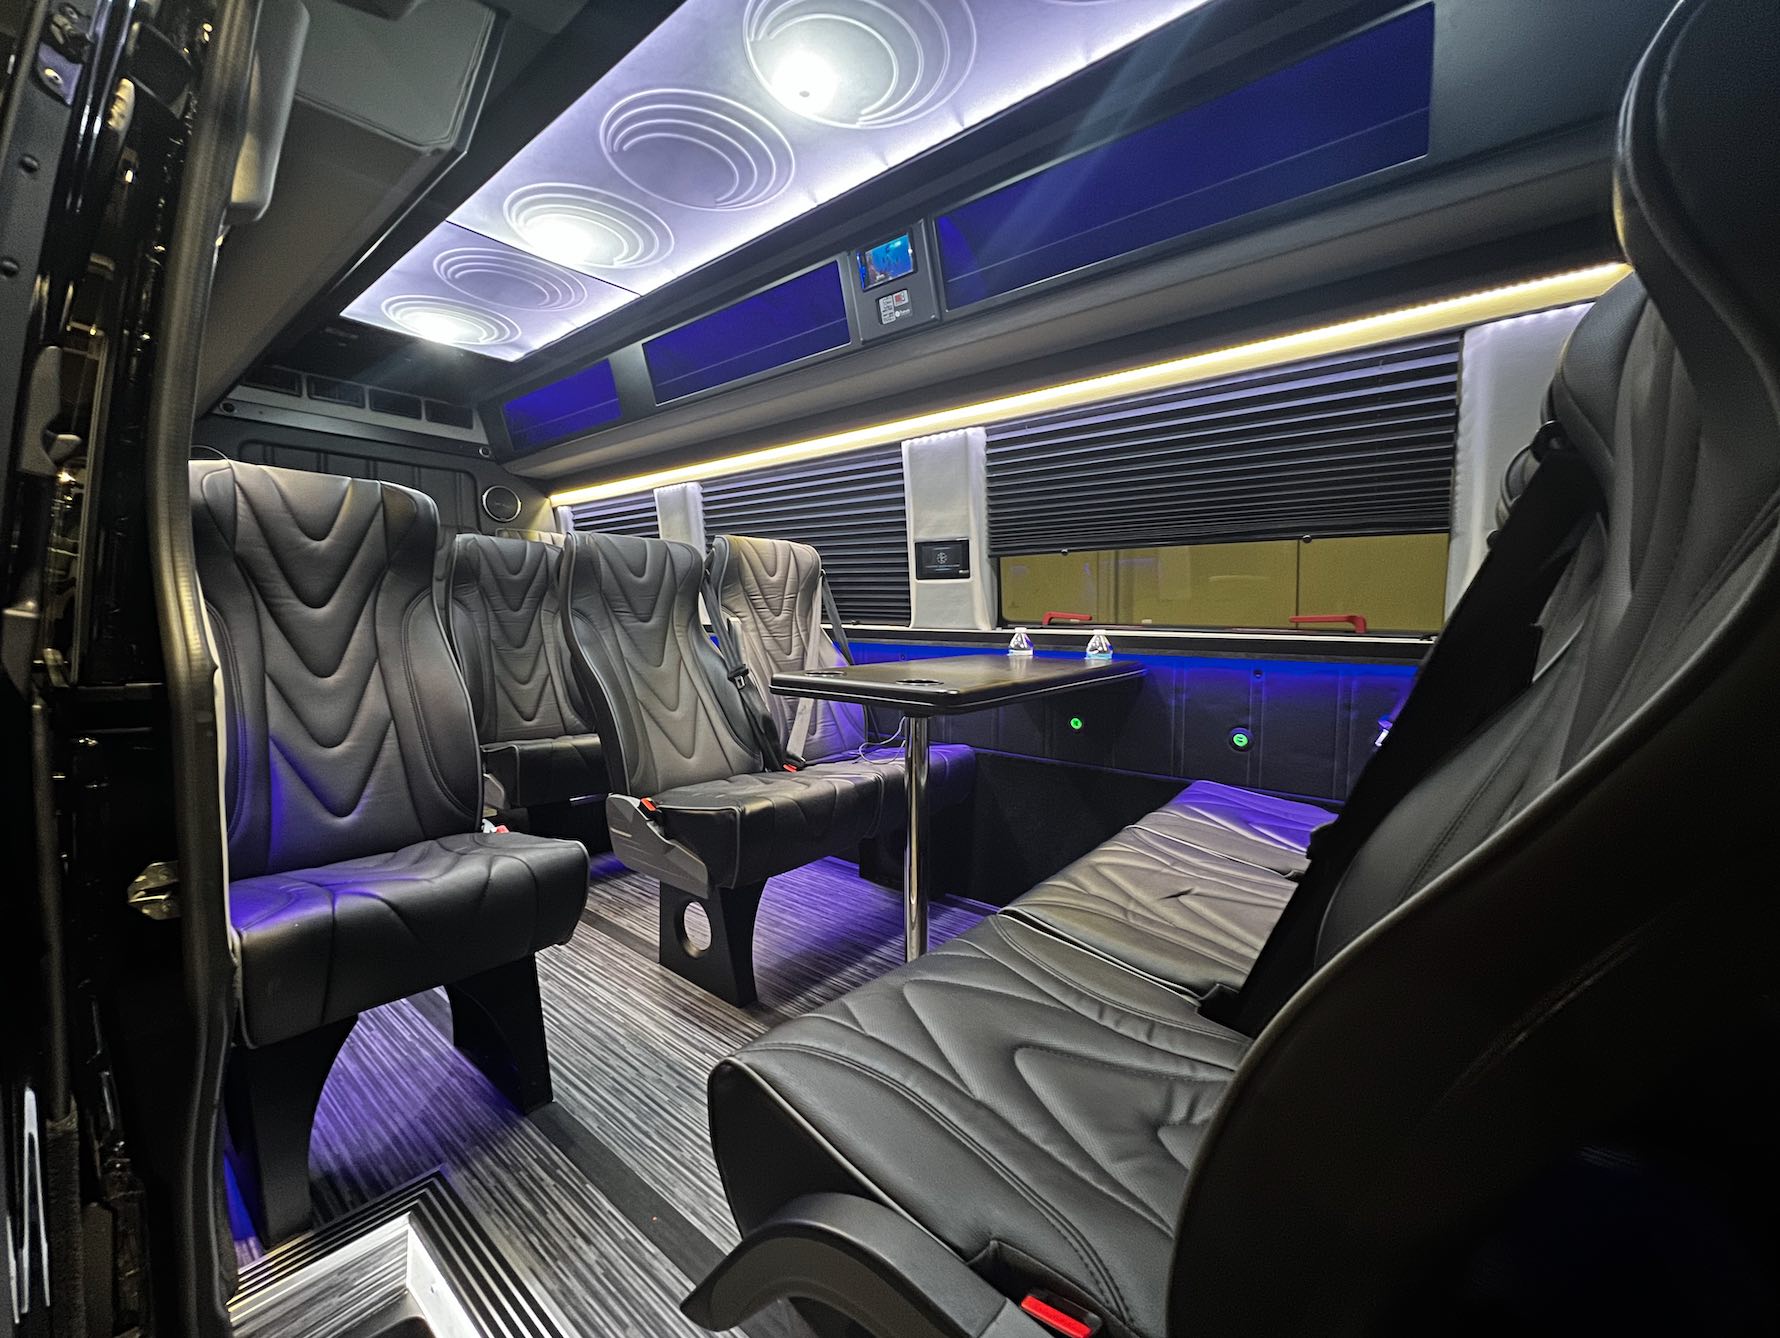 Golden Limo Executive Sprinter Shuttle, interior view with view of conference table seating